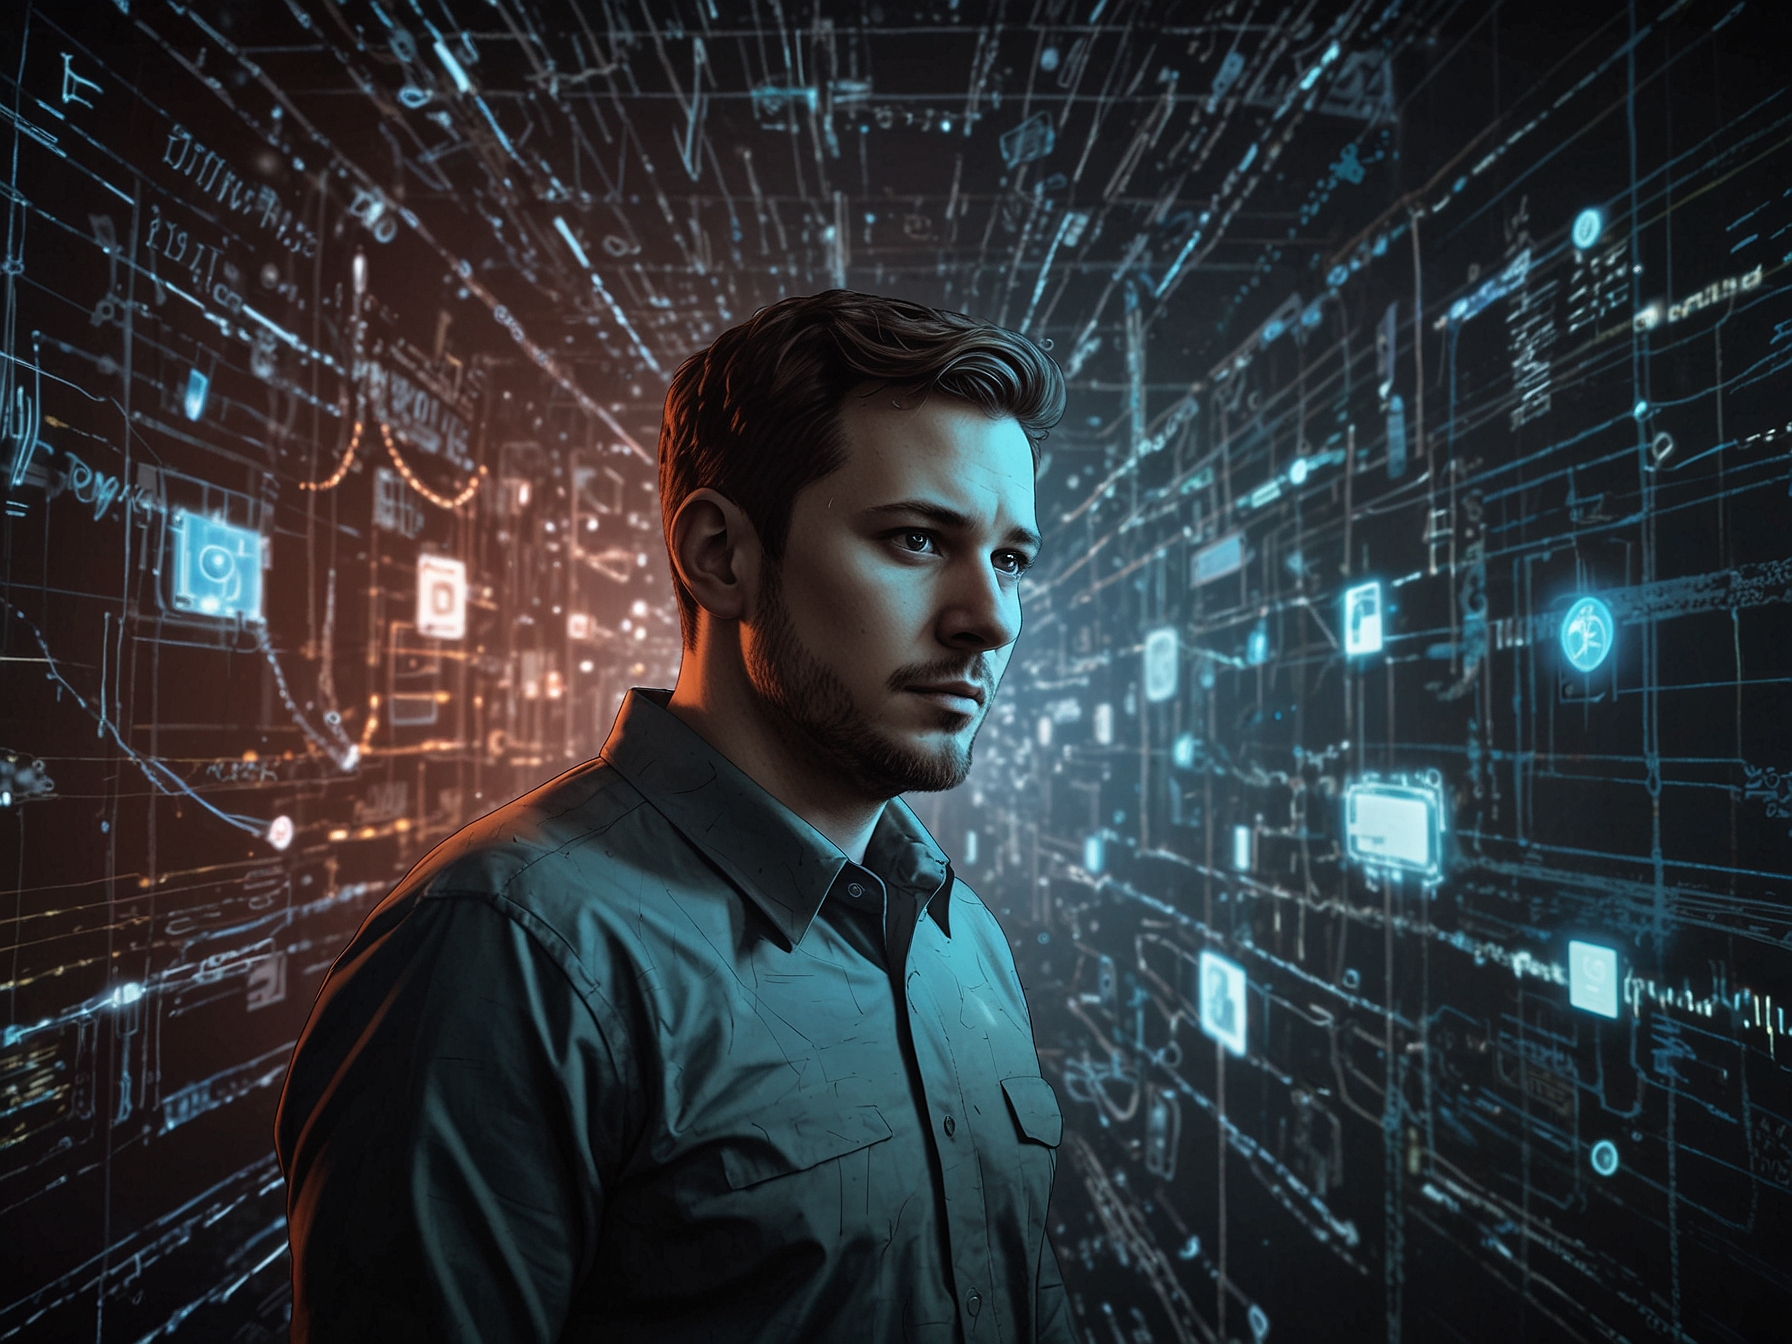 A depiction of an individual surrounded by AI-powered surveillance technologies, highlighting the balance between security and the risk of infringing on privacy and autonomy.